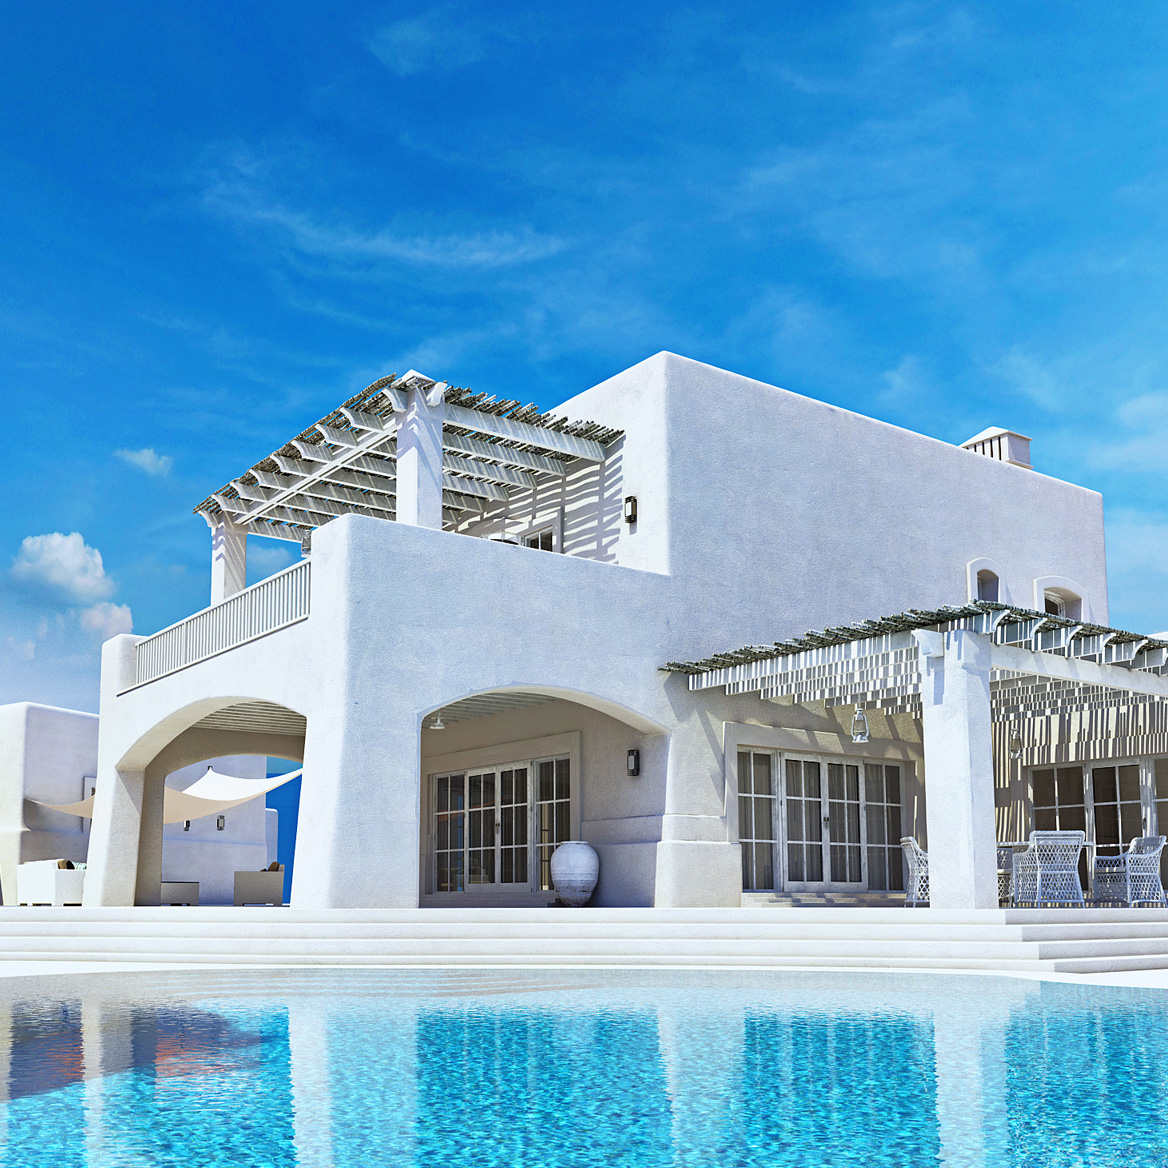 property for sale costa del sol apartments villas for sale from element realty